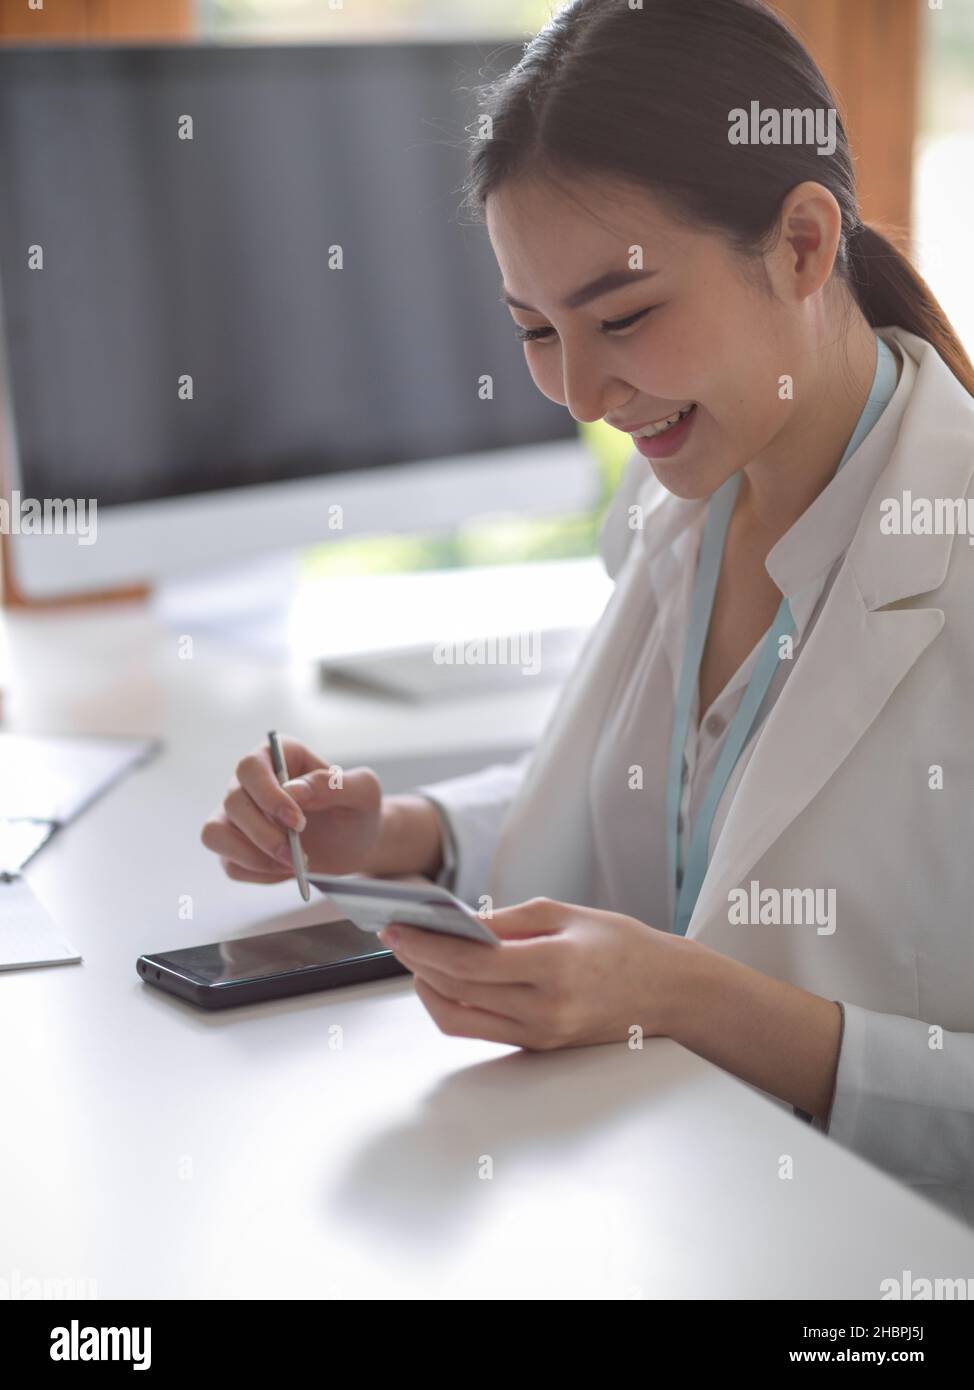 A portrait of a beautiful business woman checking her payroll on a mobile banking application. A woman is making a purchase and paying for it online. Stock Photo